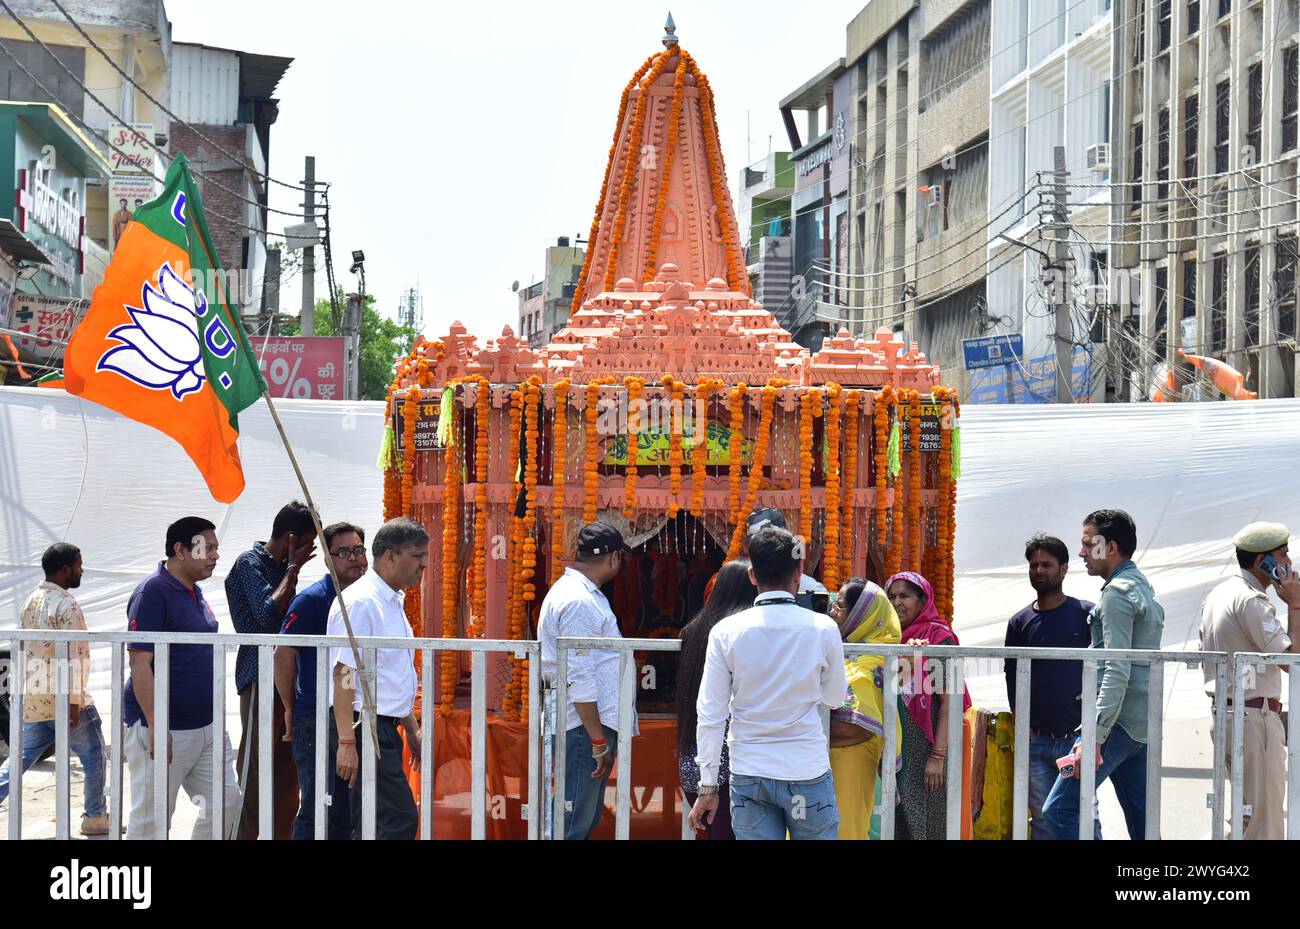 GHAZIABAD, INDIA - APRIL 6: Tableaux of Ram temple made in Prime Minister Narendra Modi's road show on Ghaziabad Ambedkar Road on April 6, 2024 in Ghaziabad, India. Holding the party symbol 'lotus', PM Modi waved at the cheering crowd who greeted the four leaders with the slogans of 'Abki baar 400 paar' (400-plus seats for NDA this time), 'Har Har Modi' and 'Jai Shri Ram'. BJP first Lok Sabha election roadshow in Uttar Pradesh, canvassing support for the BJP's Ghaziabad candidate Atul Garg, who has been fielded in place of two-time MP and Union minister V K Singh. (Photo by Sakib Ali/Hindustan Stock Photo